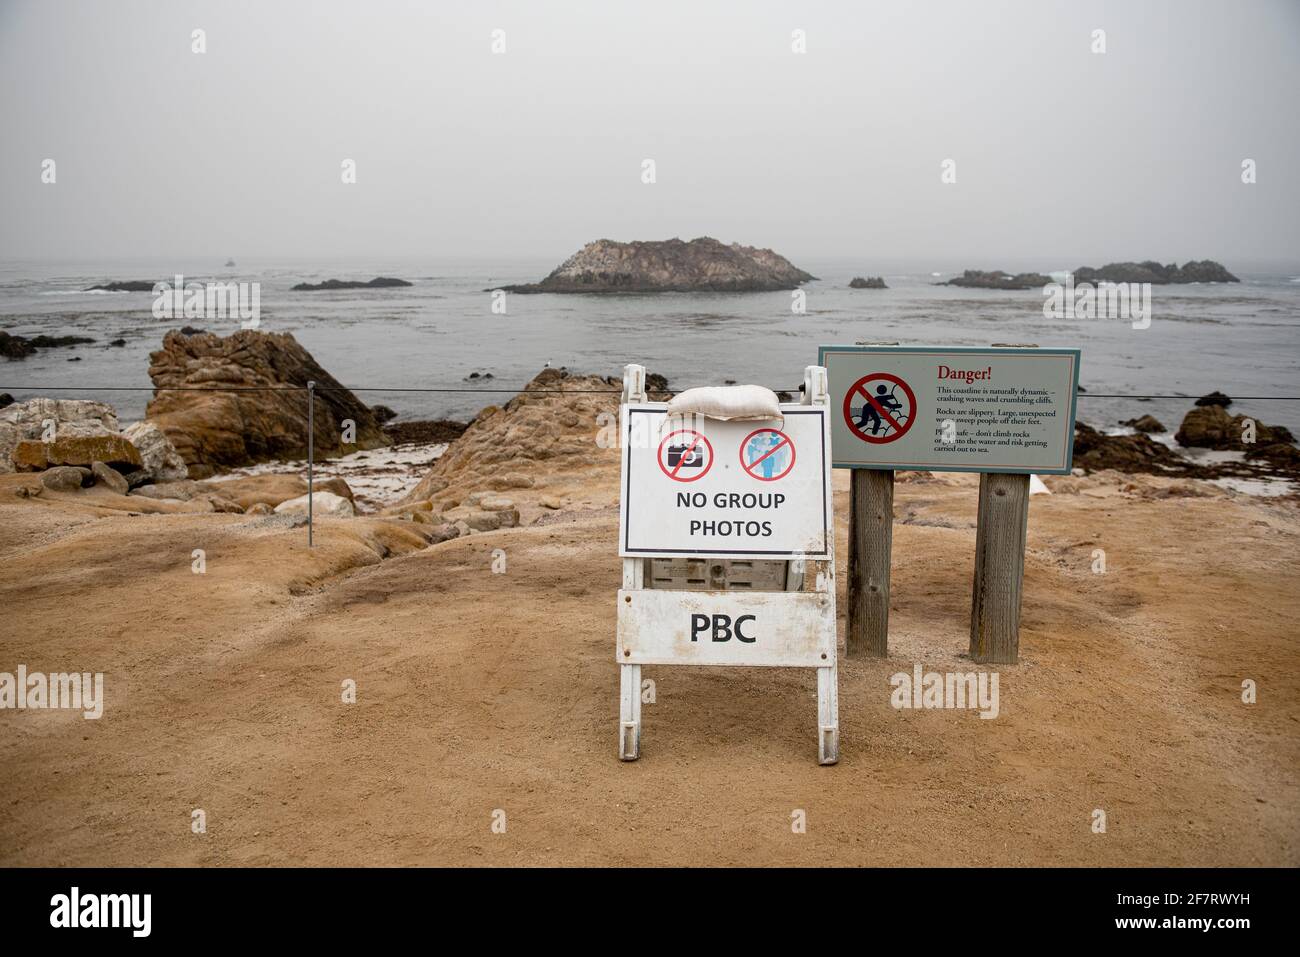 Sign prohibiting group photos at the Pacific Grove in California, USA, during the COVID-19 pandemics Stock Photo